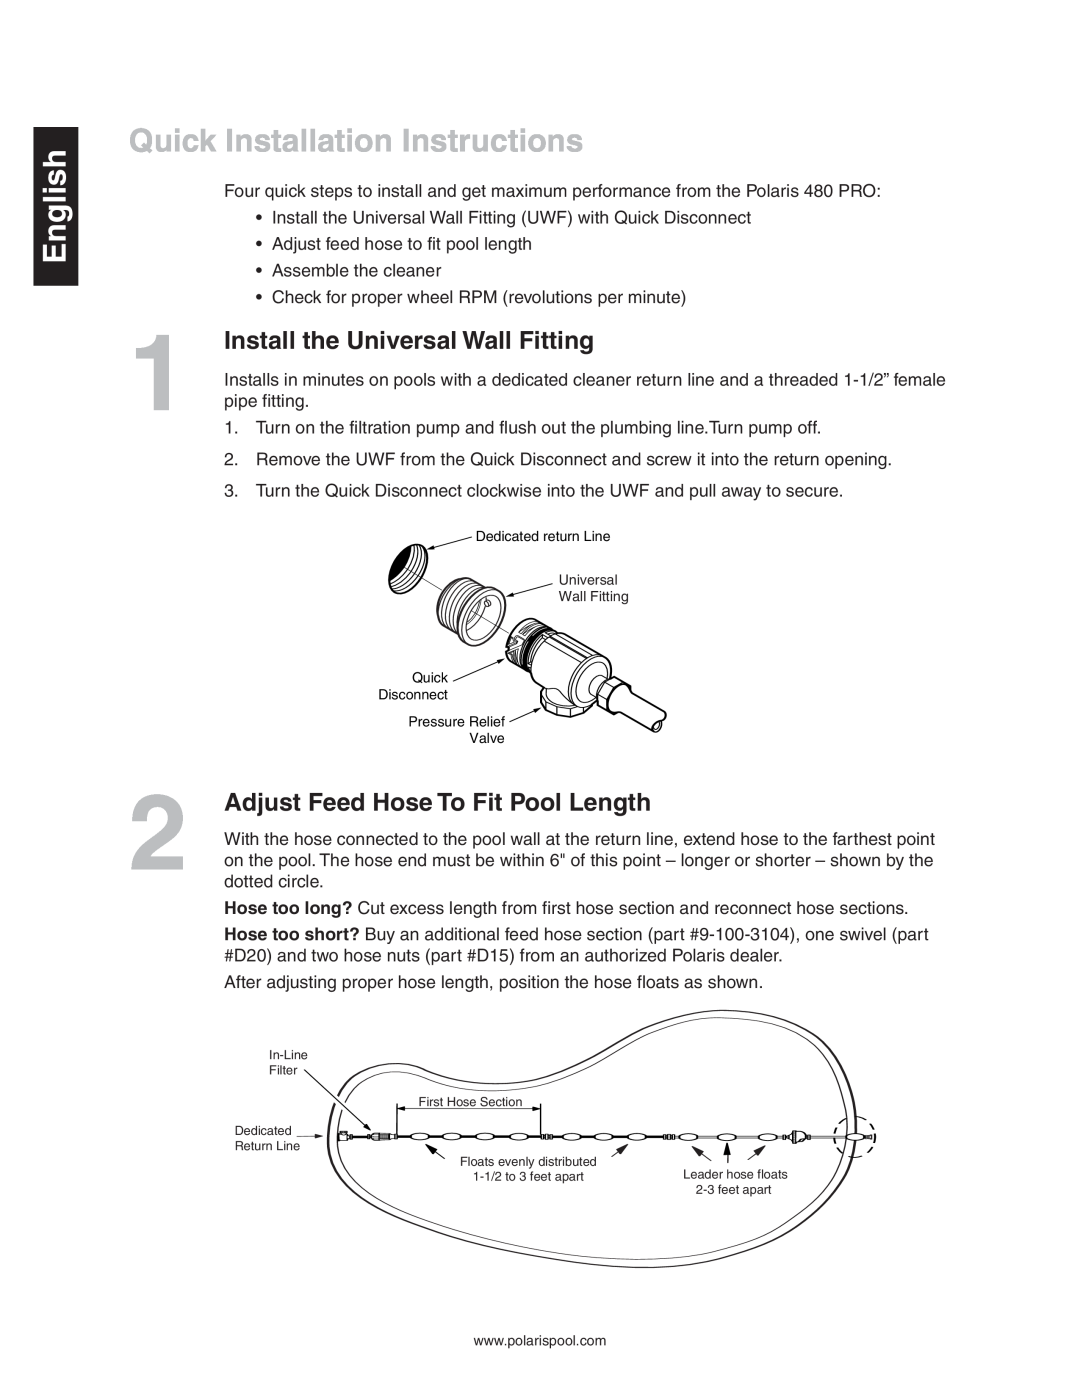 Sony 480 Install the Universal Wall Fitting, Adjust Feed Hose To Fit Pool Length, English, Quick Installation Instructions 